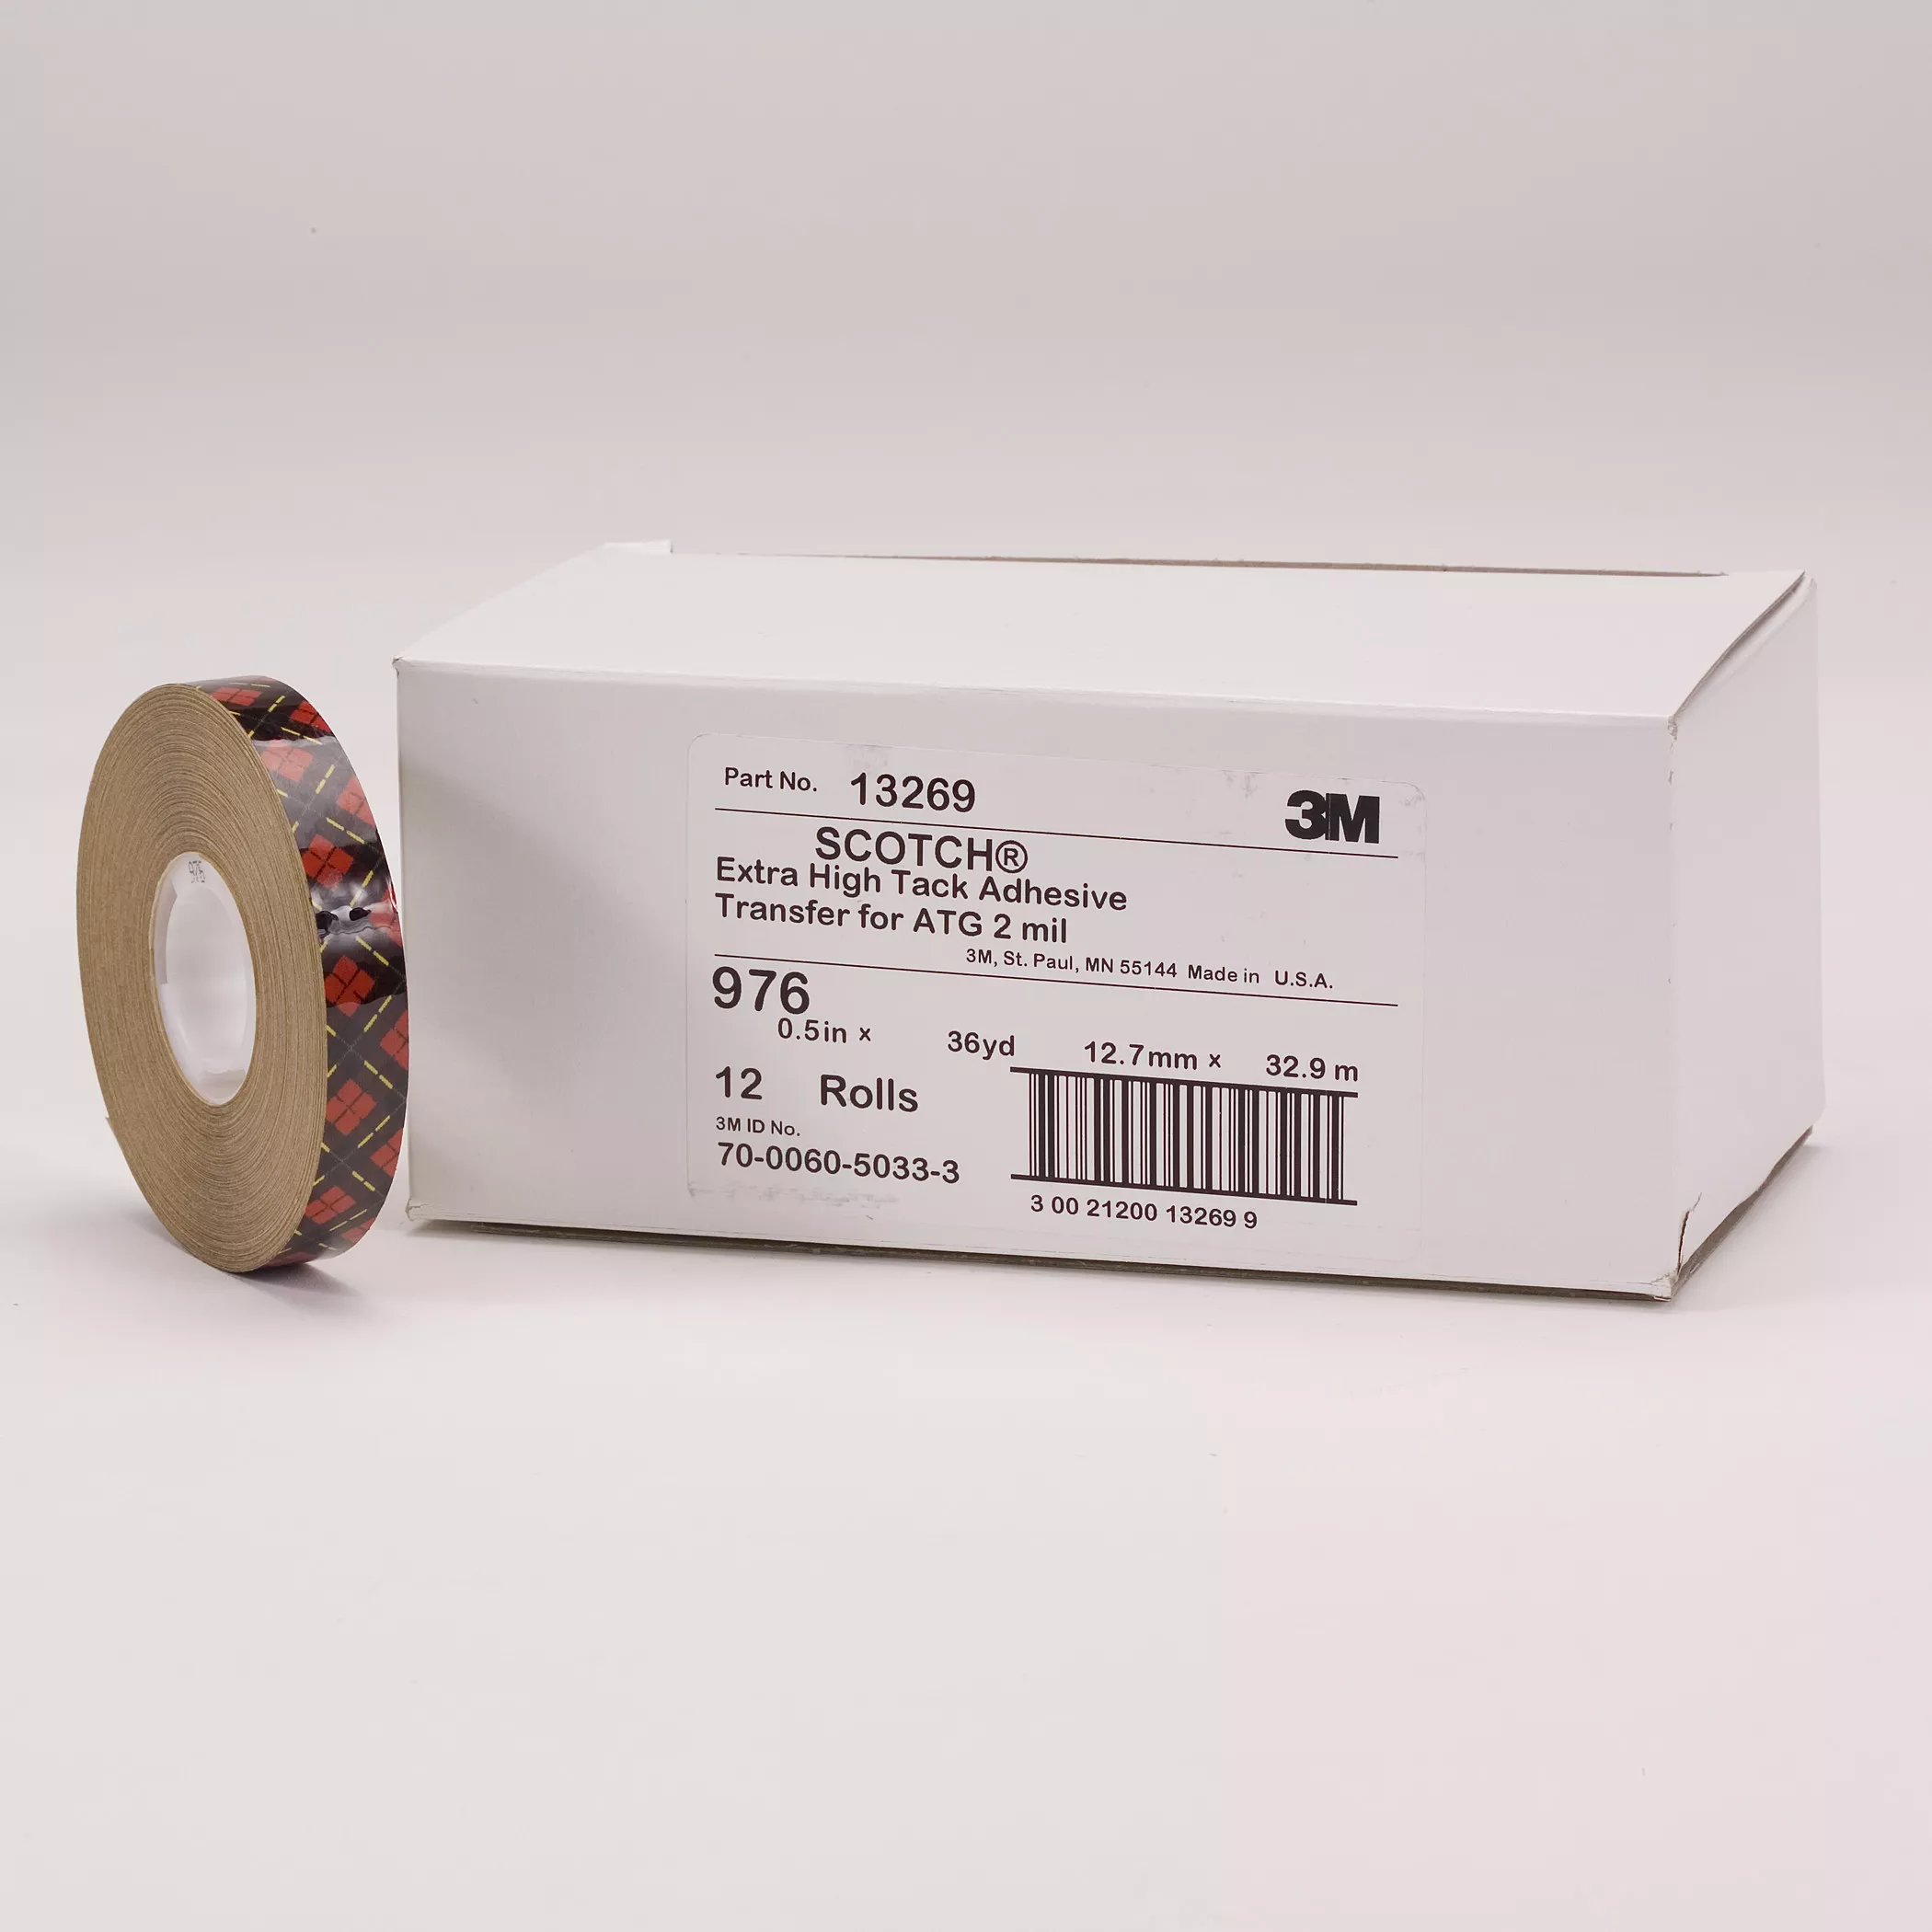 Scotch® ATG Adhesive Transfer Tape 976, Clear, 1/4 in x 60 yd, 2 mil,
(12 Roll/Carton) 72 Roll/Case